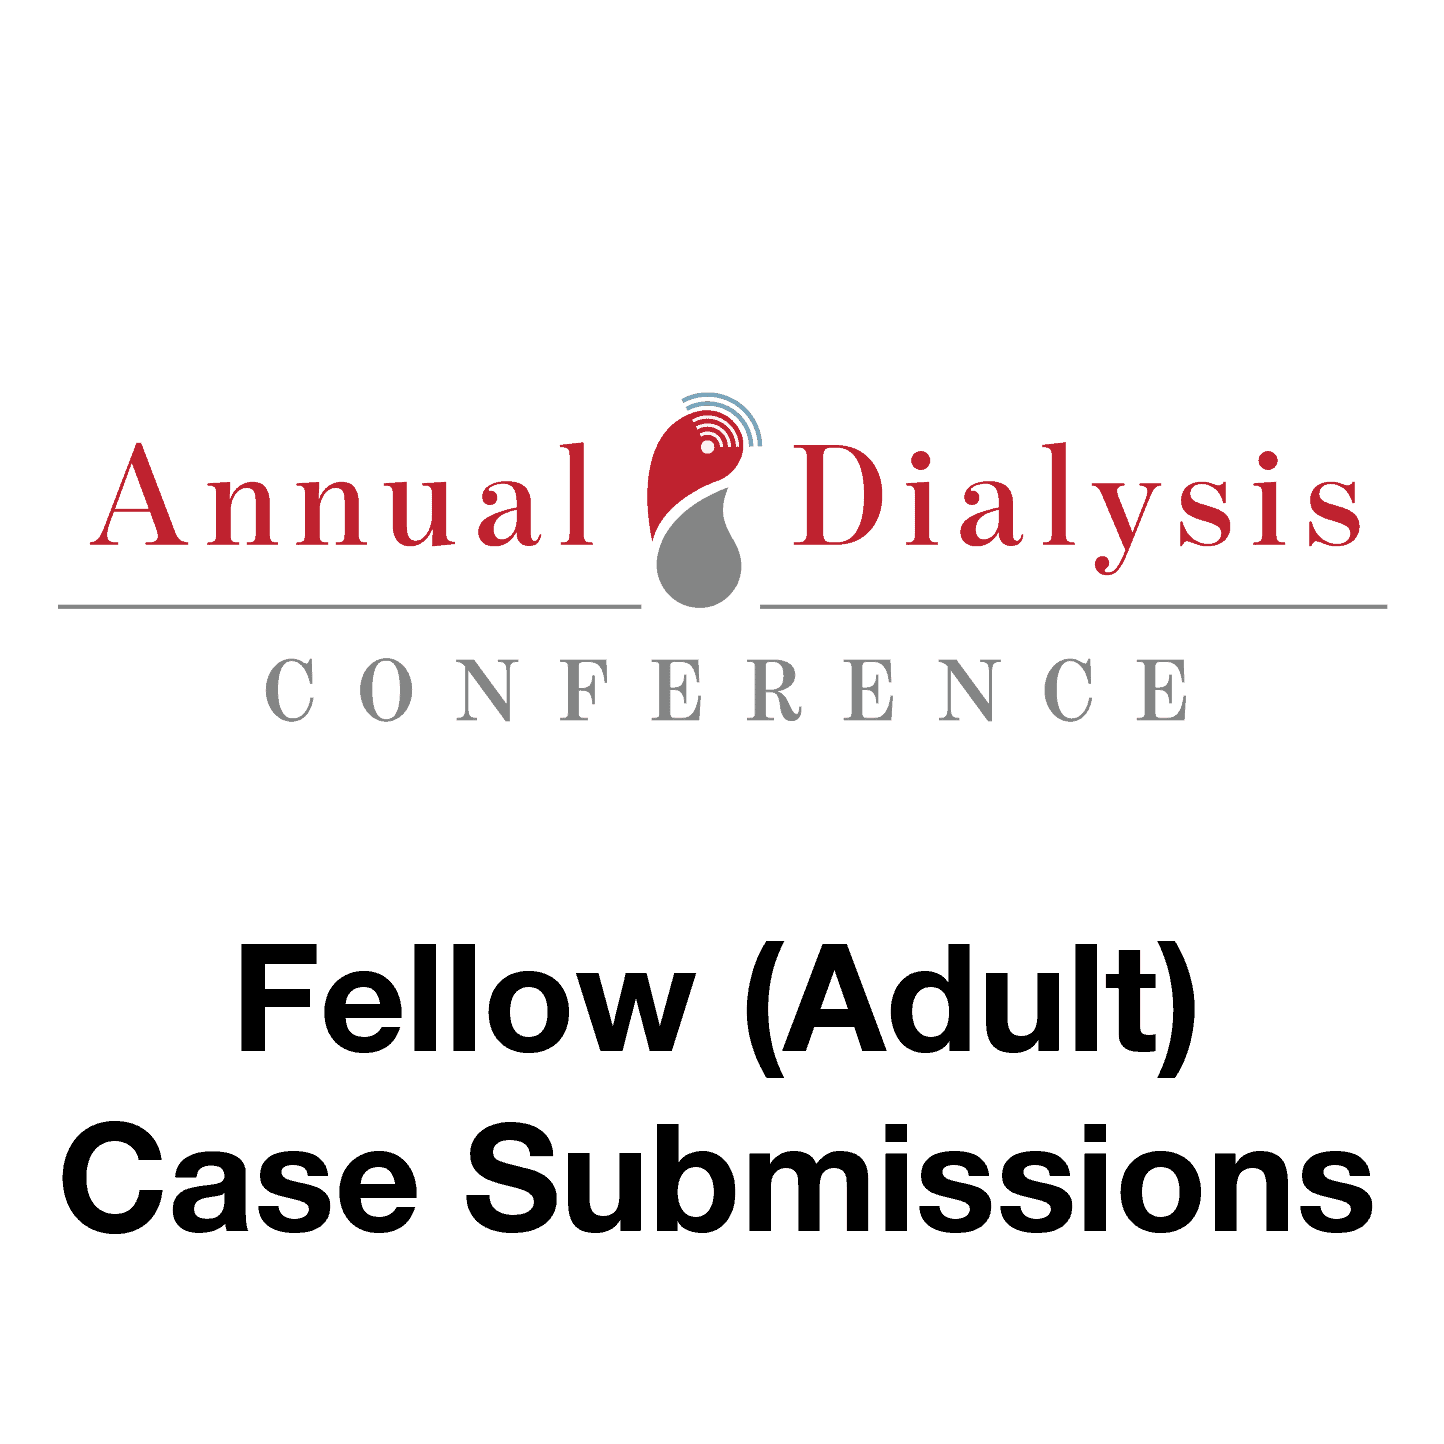 Fellow (Adult) Case Submissions